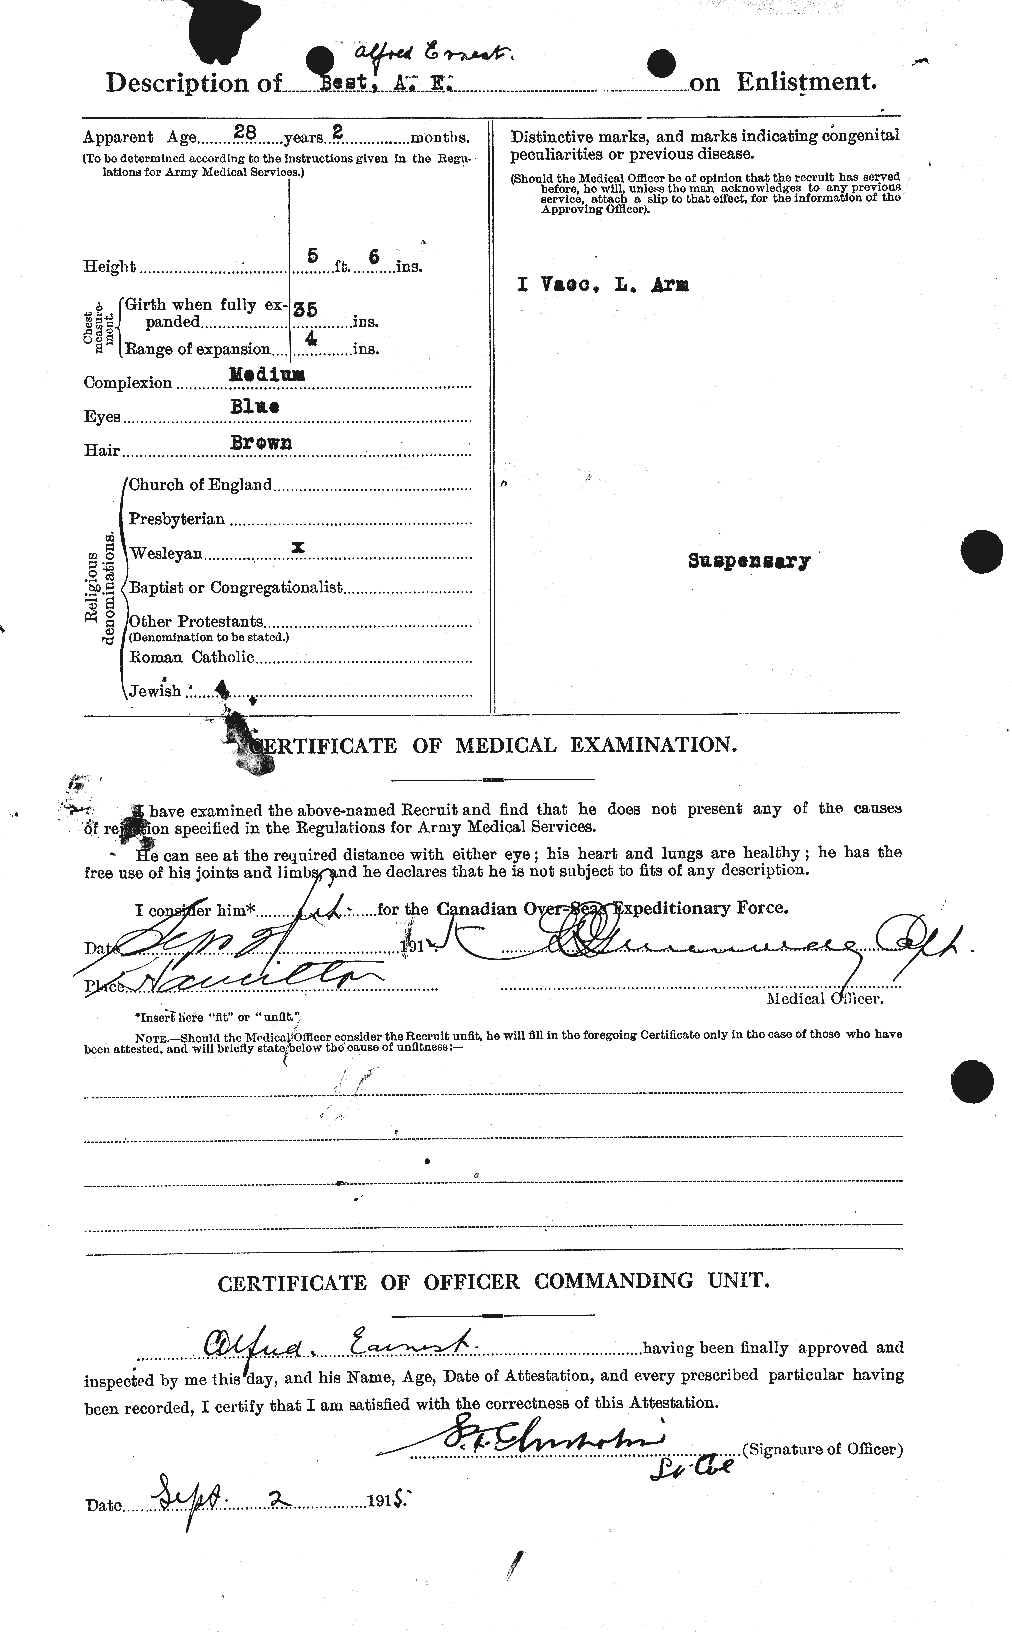 Personnel Records of the First World War - CEF 240217b